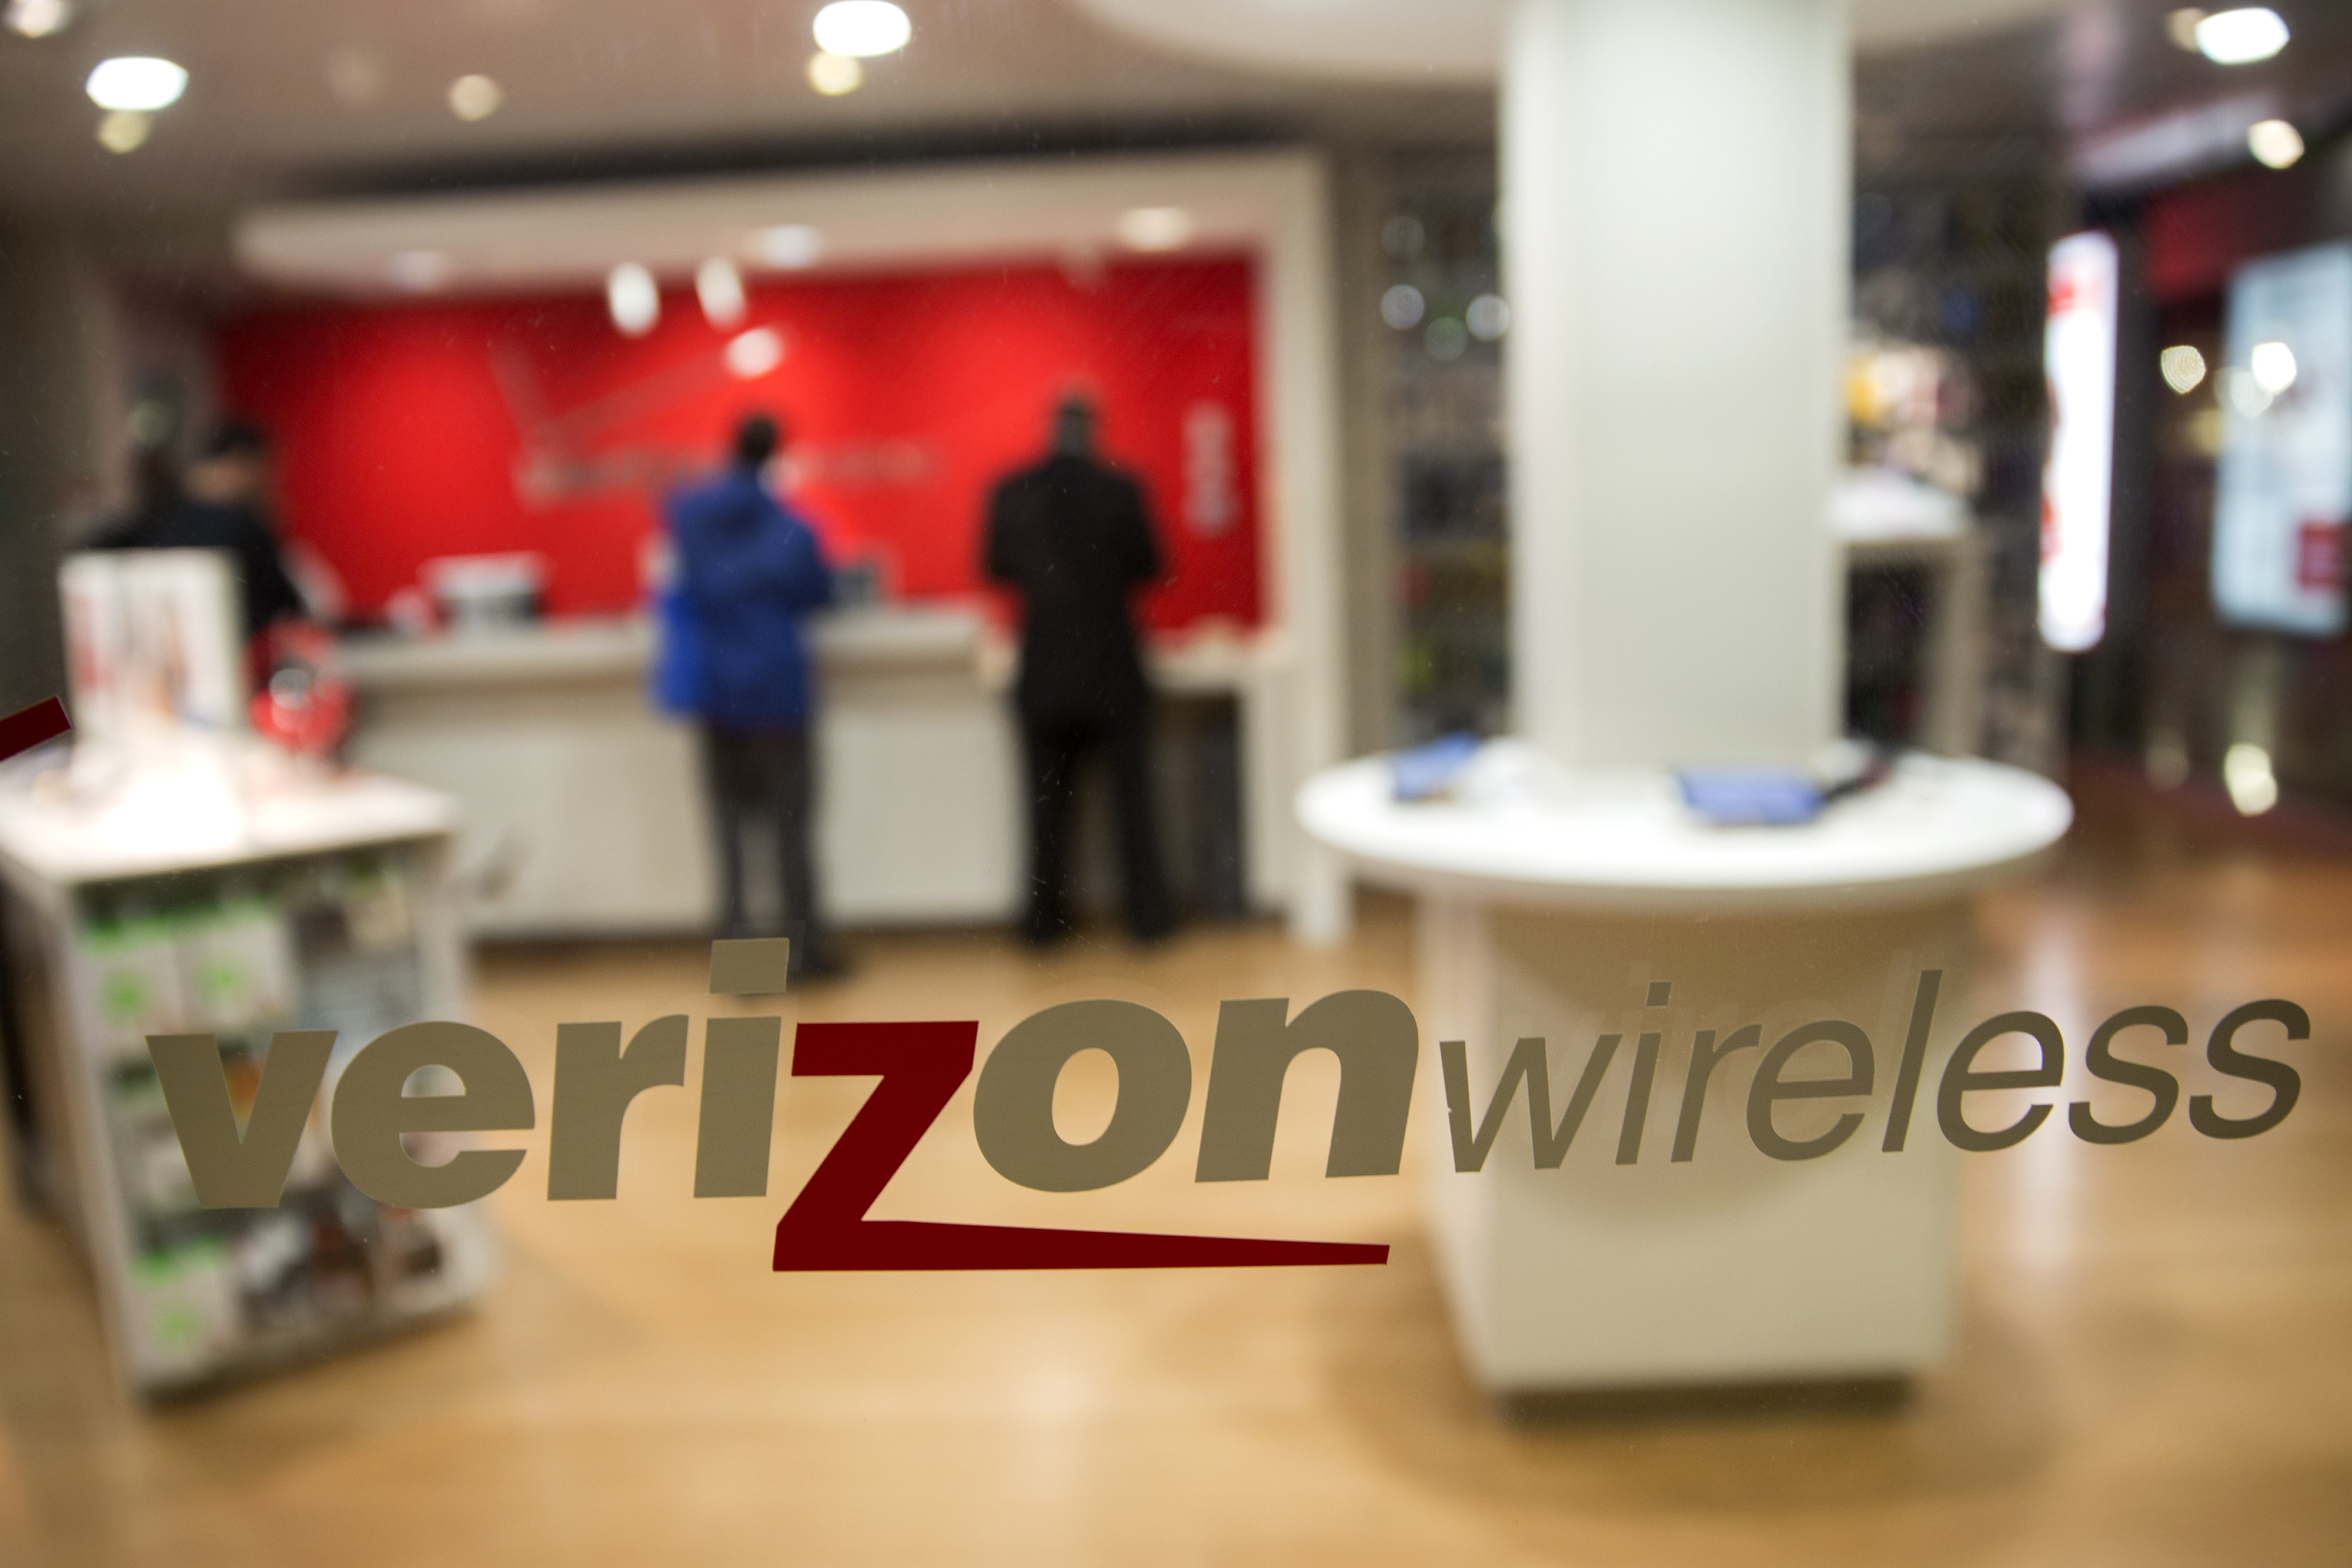 The Verizon Wireless logo is displayed on a window at a retail store in Washington, D.C. on Oct. 23, 2014. (Bloomberg/Getty Images)